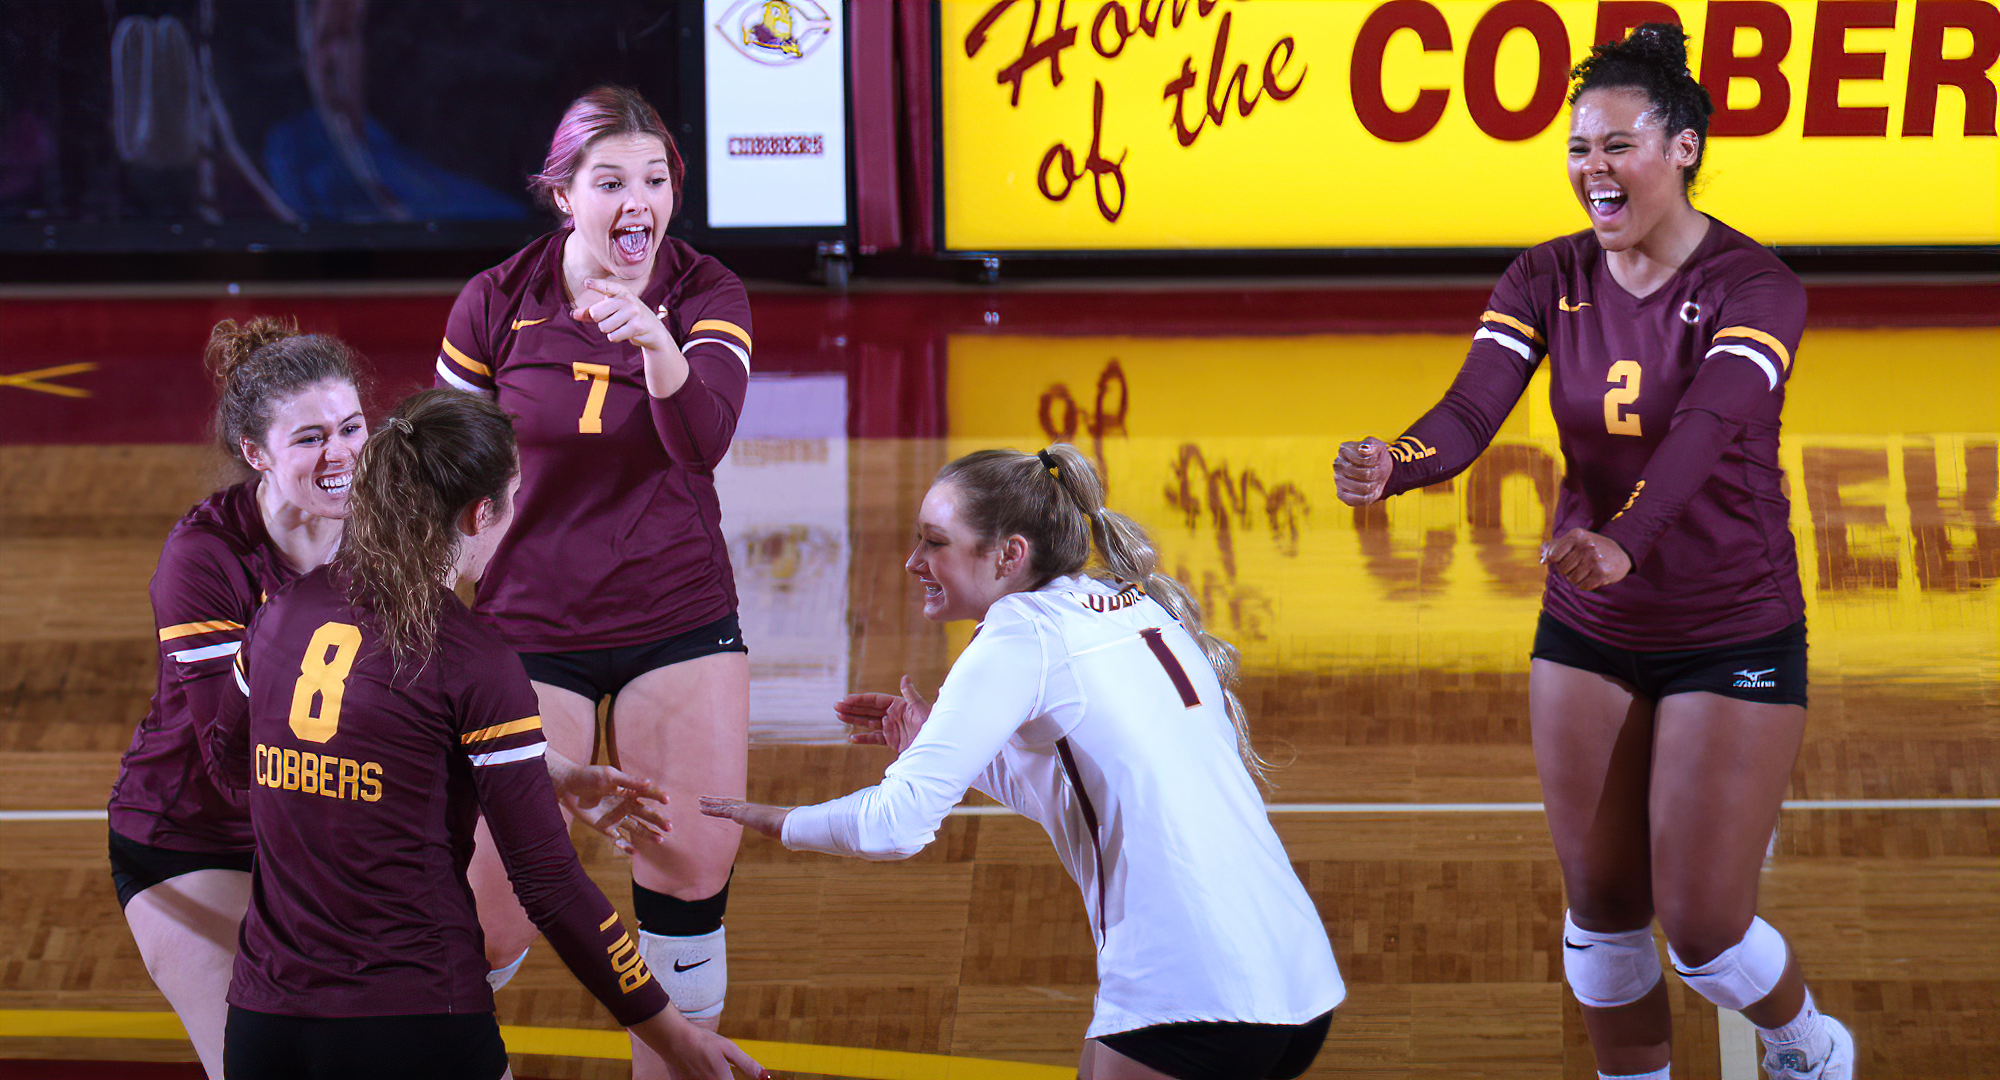 Concordia fell behind 1-0 at St. Ben's, but won the next three sets and earned its second win of the weekend and fourth in the last six matches.